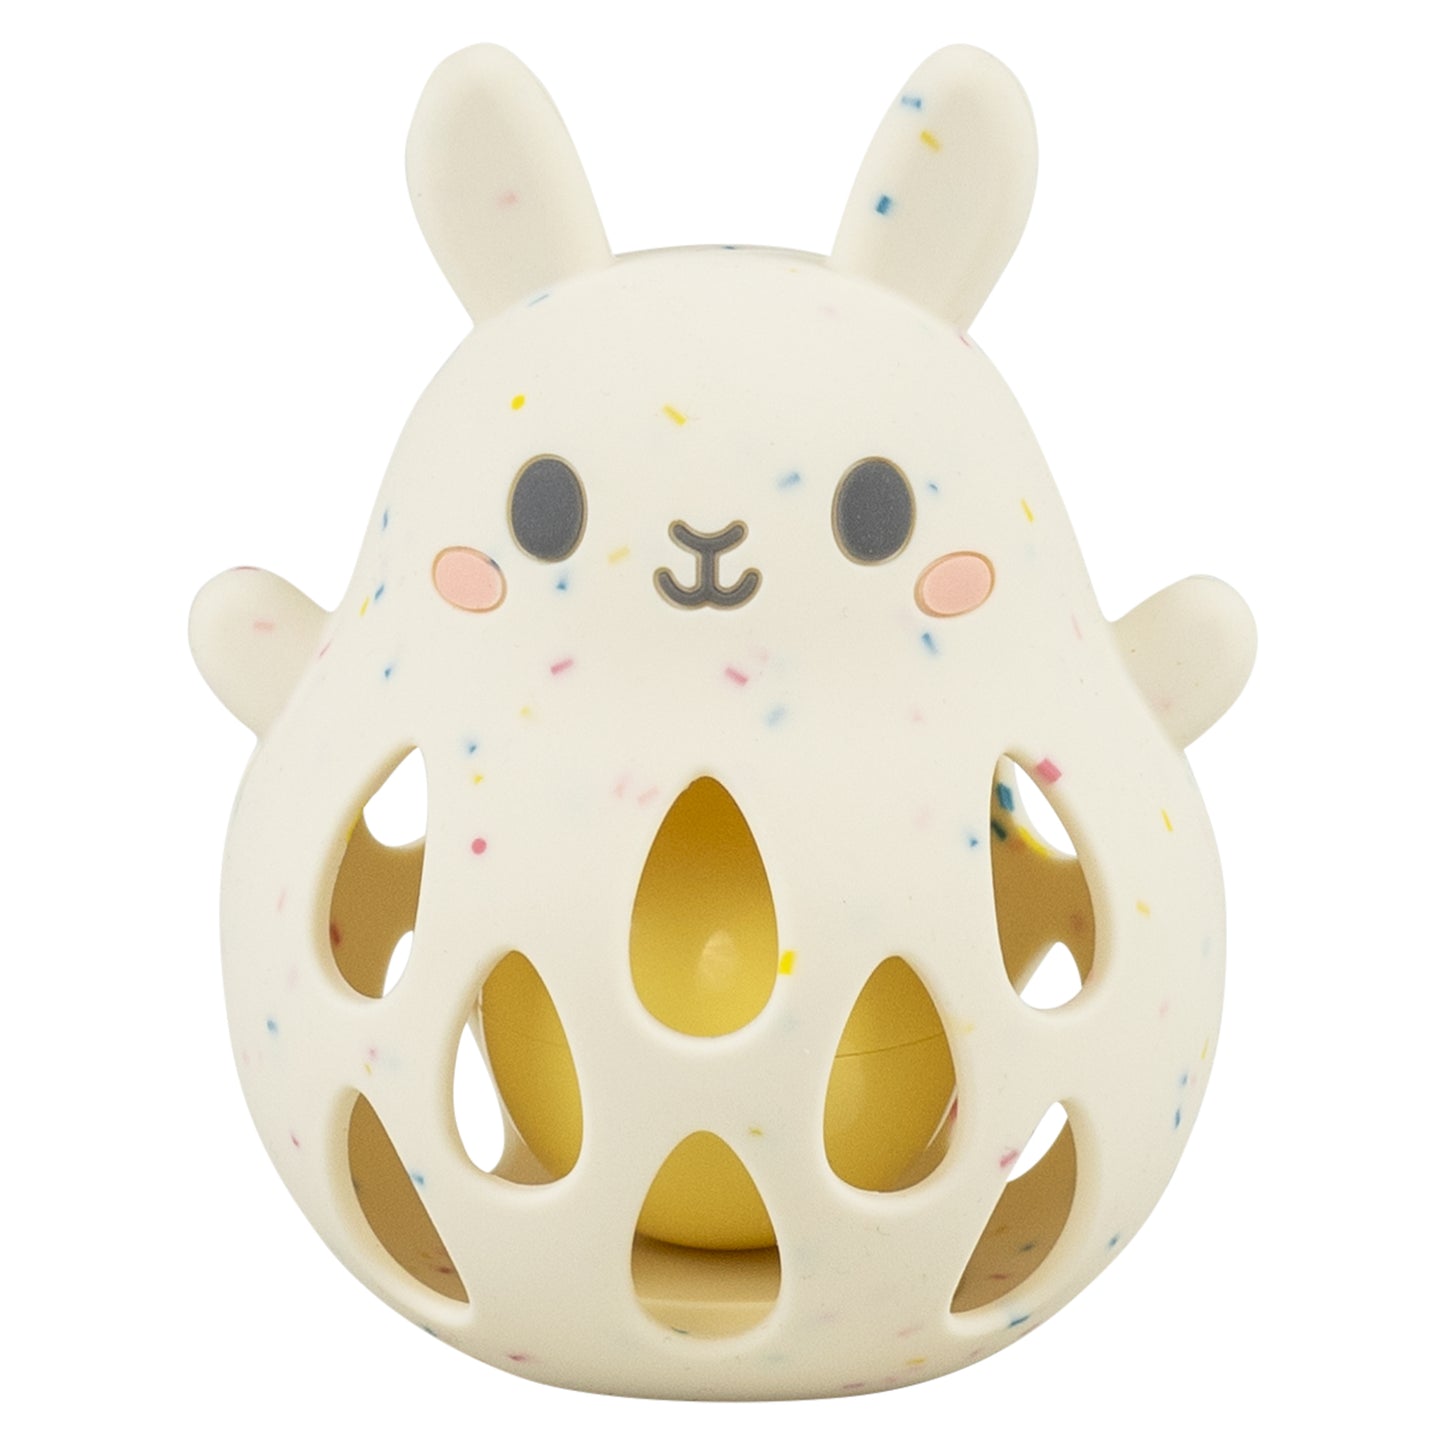 Tiger Tribe Silicone Rattle Bunny